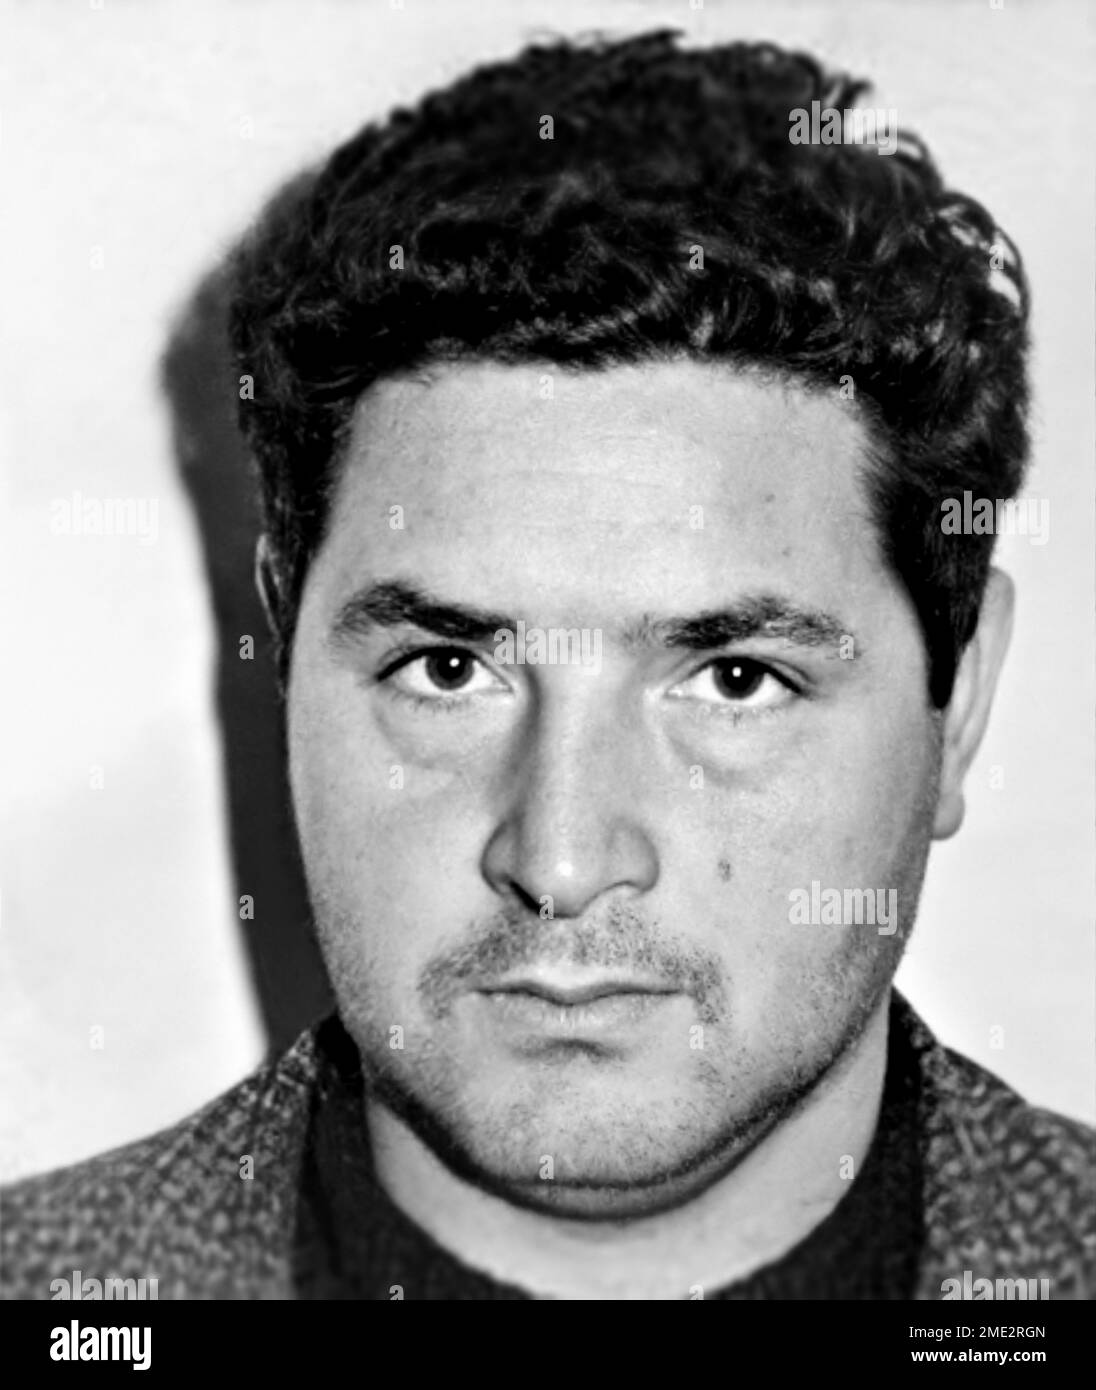 1966 ca, Corleone,  ITALY : The Mafia Boss SALVATORE Totò RIINA ( 1930 - 2017 ), aka U CURTU of Clan dei Corleonesi , italian COSA NOSTRA Mafioso . Was a Sicilian Mafia boss from Corleone ( Palermo ) . Author of hundreds of murders from the 70s to the 90s, as well as being directly responsible for some of the most serious bloodshed of Cosa Nostra . Was married with Antonietta Bagarella , sister of mafioso Leoluca Bagarella ( born 3 february 1942 ). In this image a photoboth mugshot diffused by the italian Police in 1966 ca when Riina was  young . Unknown photographer . DIGITALLY RESTORED . - Stock Photo